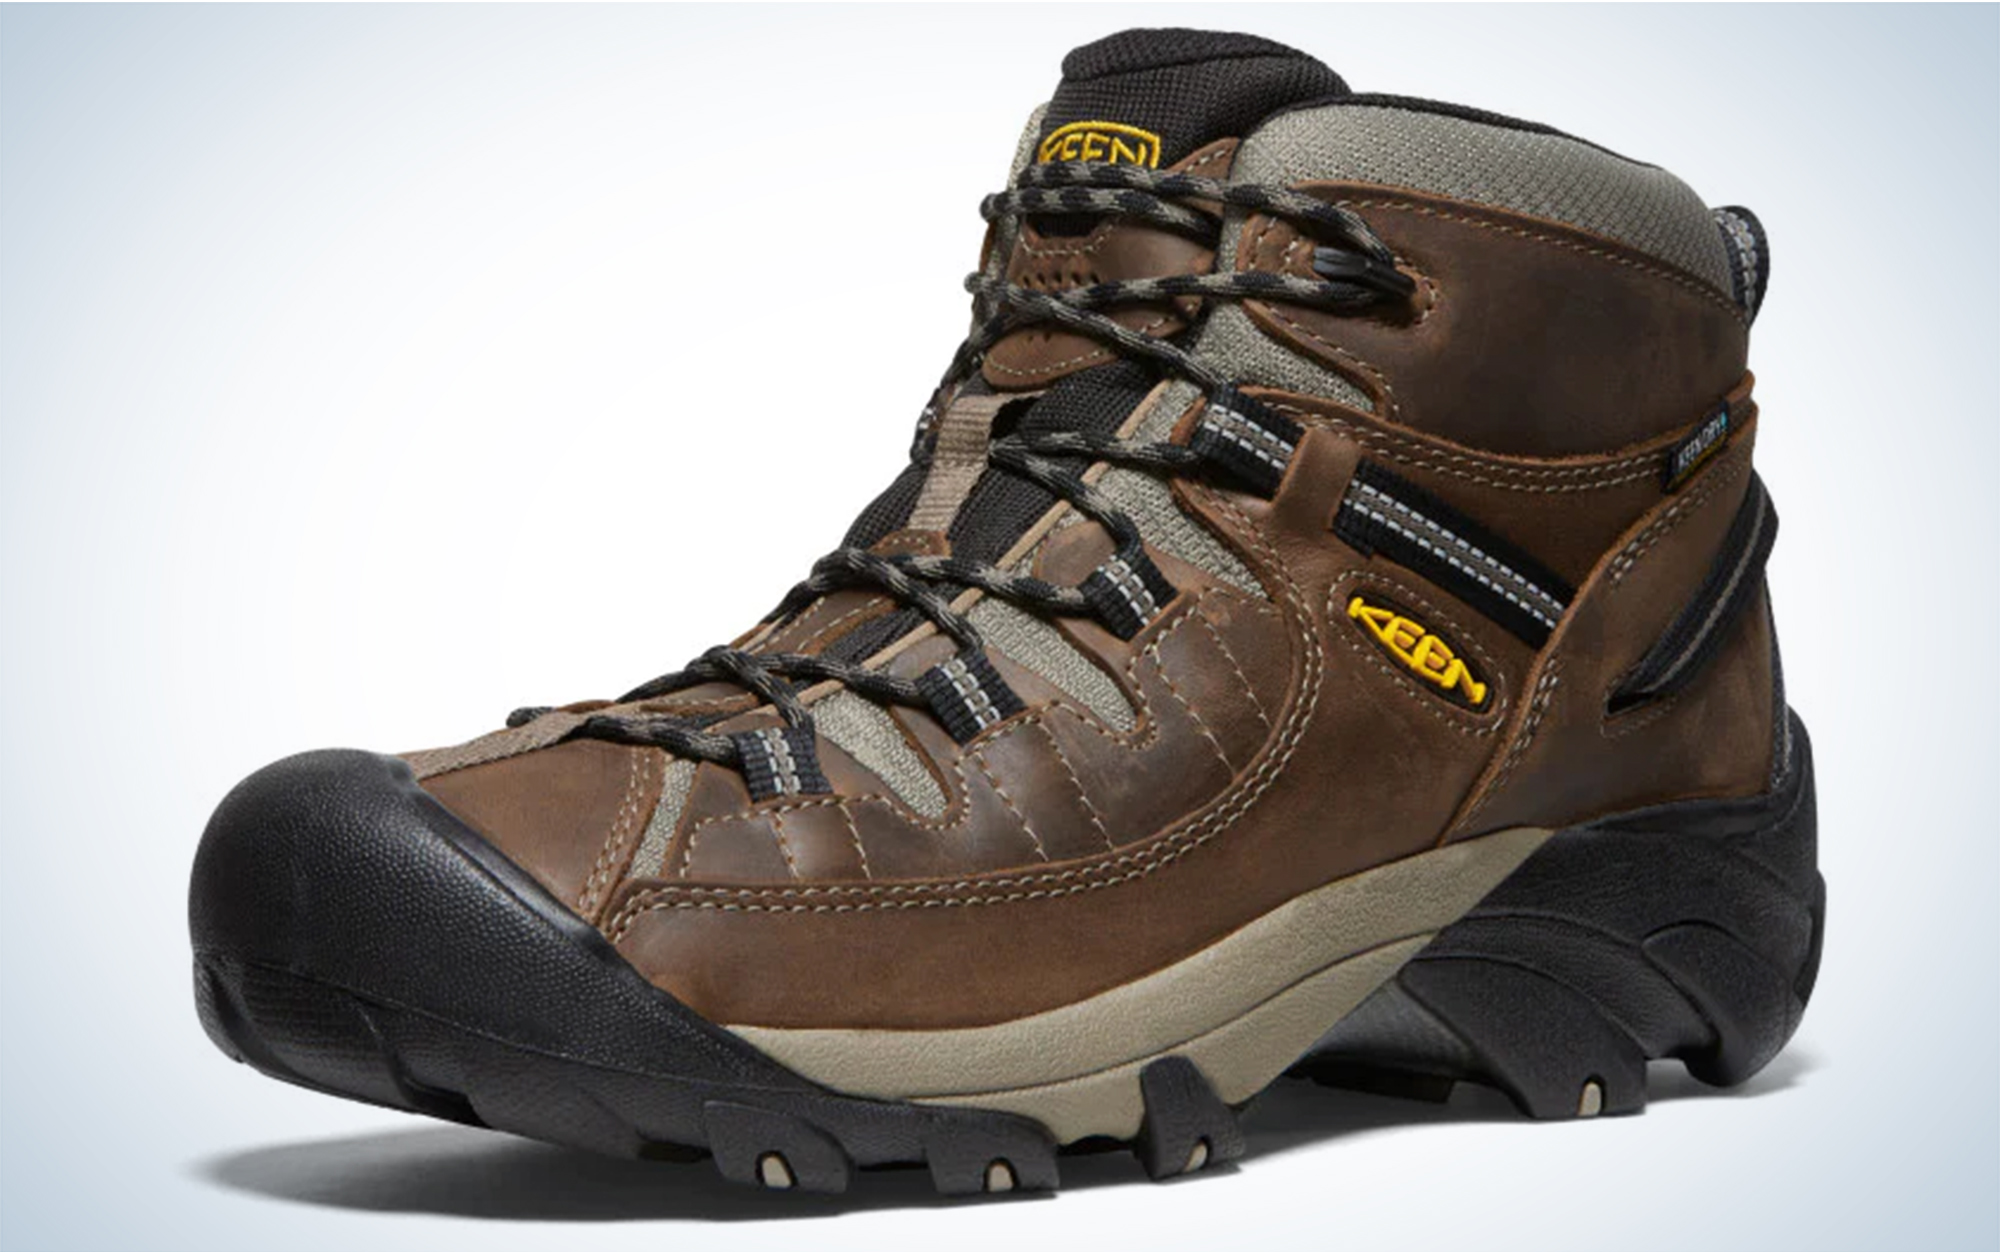 We found the best hiking boot deals on Amazon.